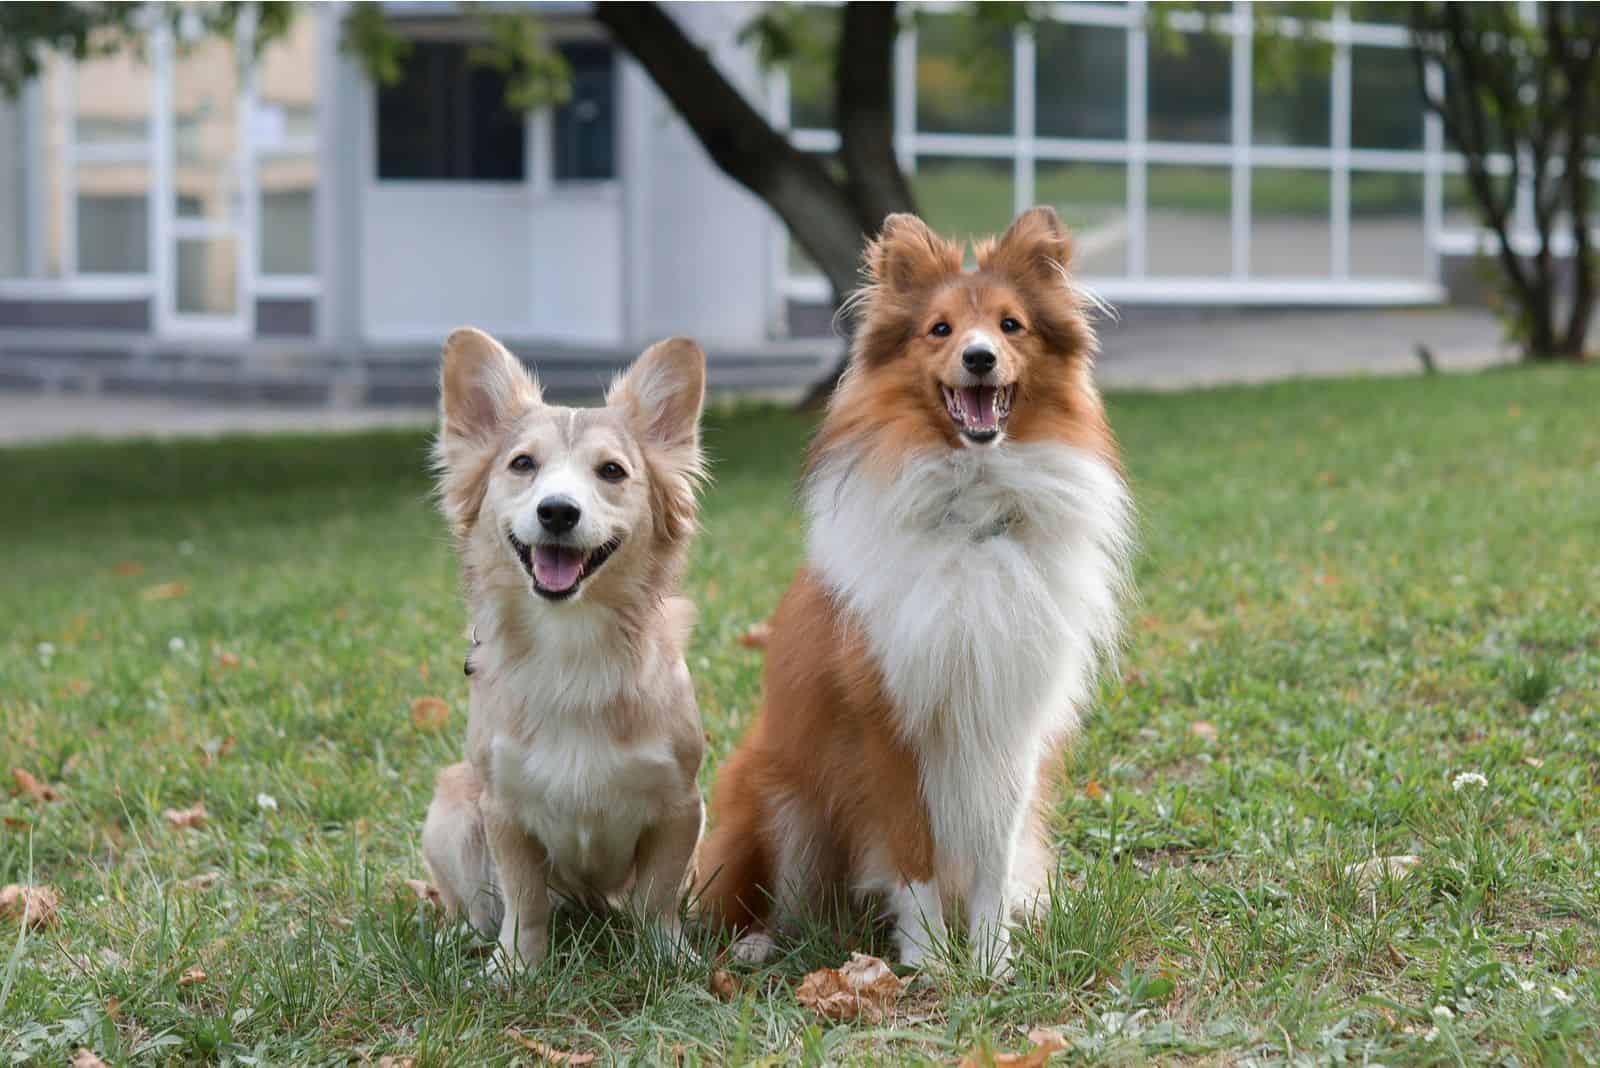 shetland sheepdog and mix breed dog standing outdoors